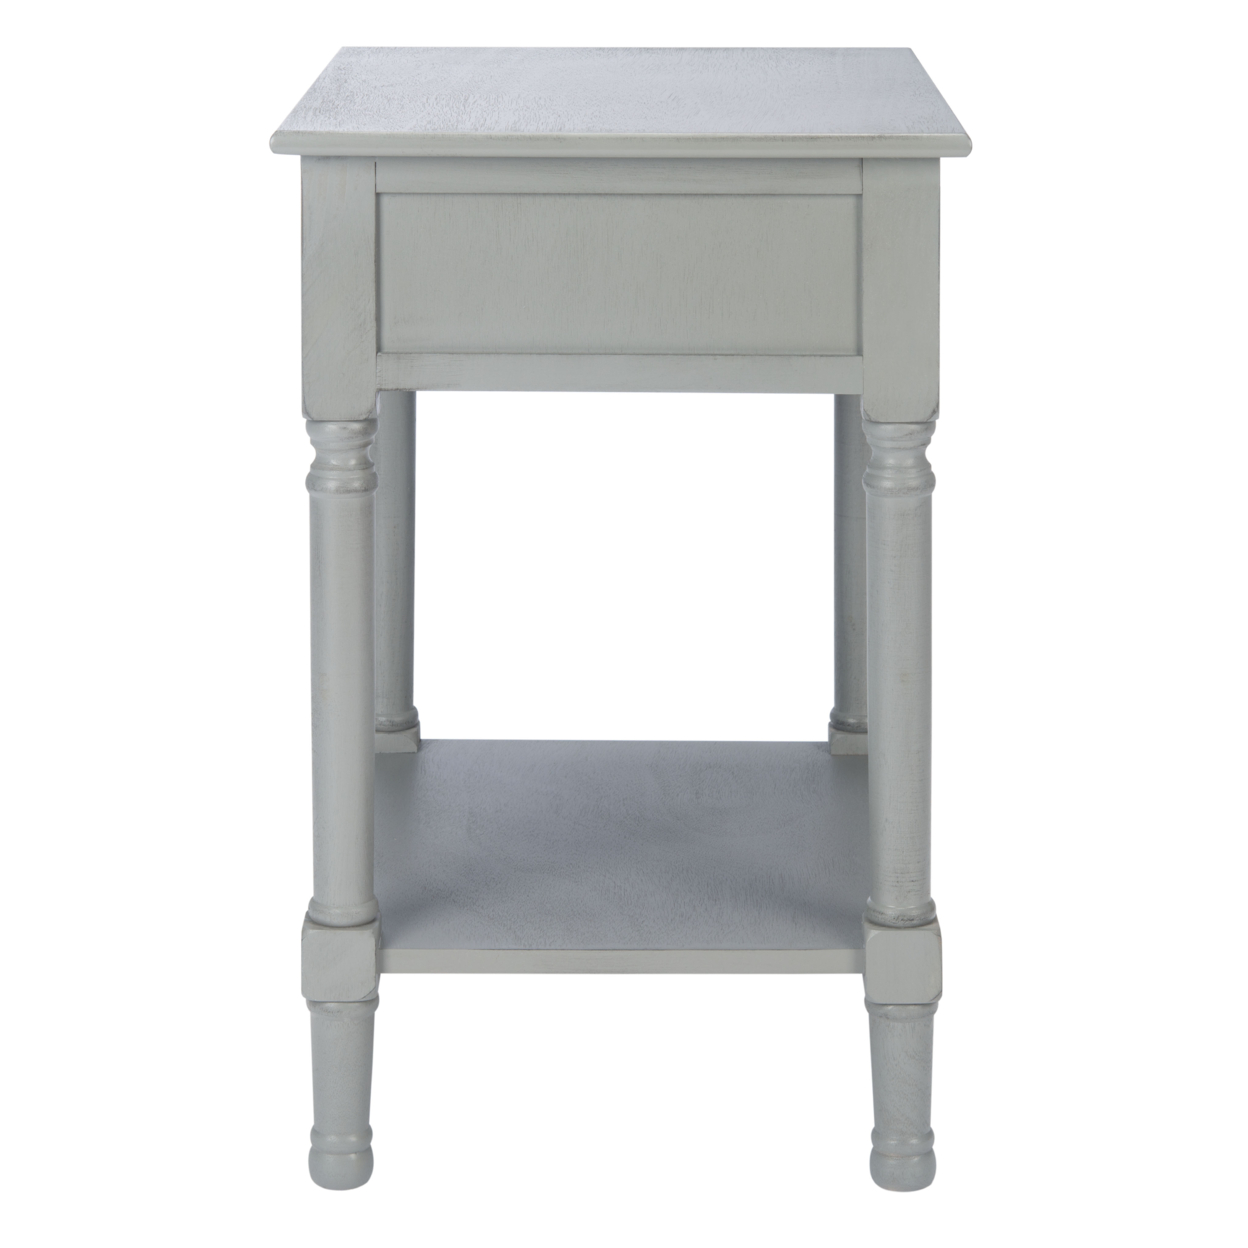 SAFAVIEH Tate 1-Drawer Accent Table Distressed / Grey